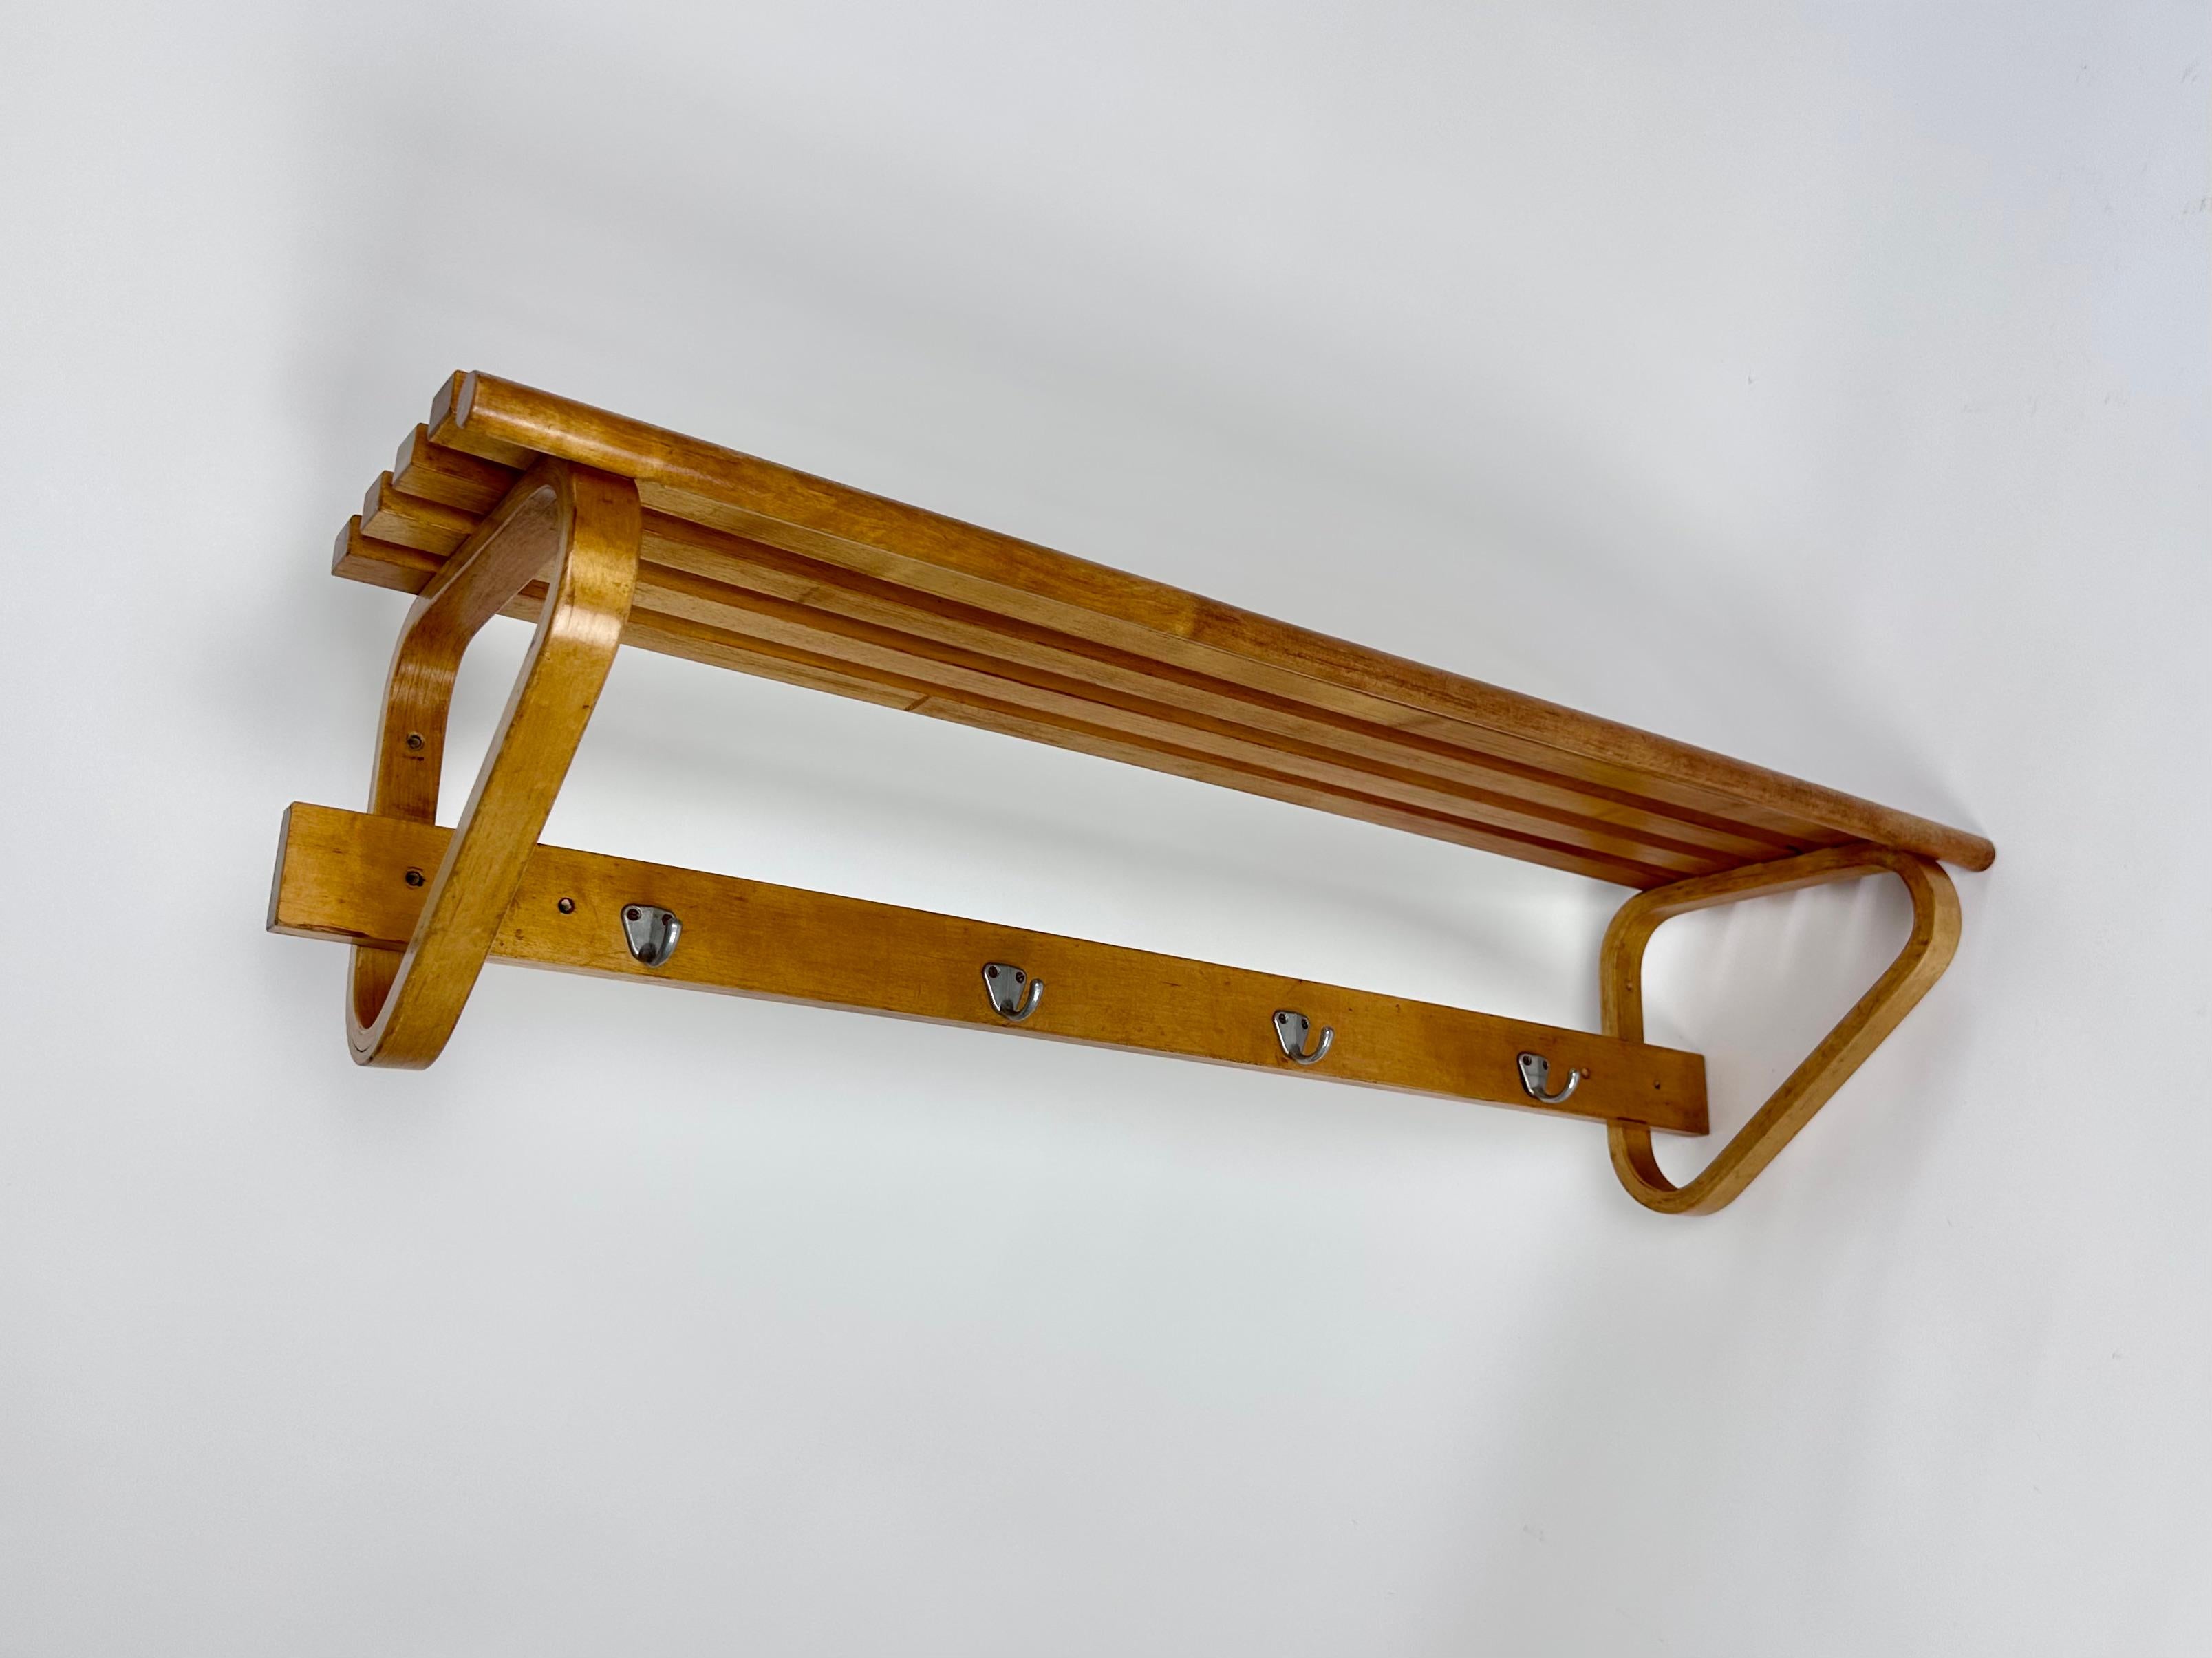 Perfectly aged coat rack, model 109c designed by Alvar Aalto in 1936, Artek Finland production.

Made of Aalto trademark rounded triangle bent ply birch supports (which were also used on other pieces), solid birch slatted shelf and rounded bar for